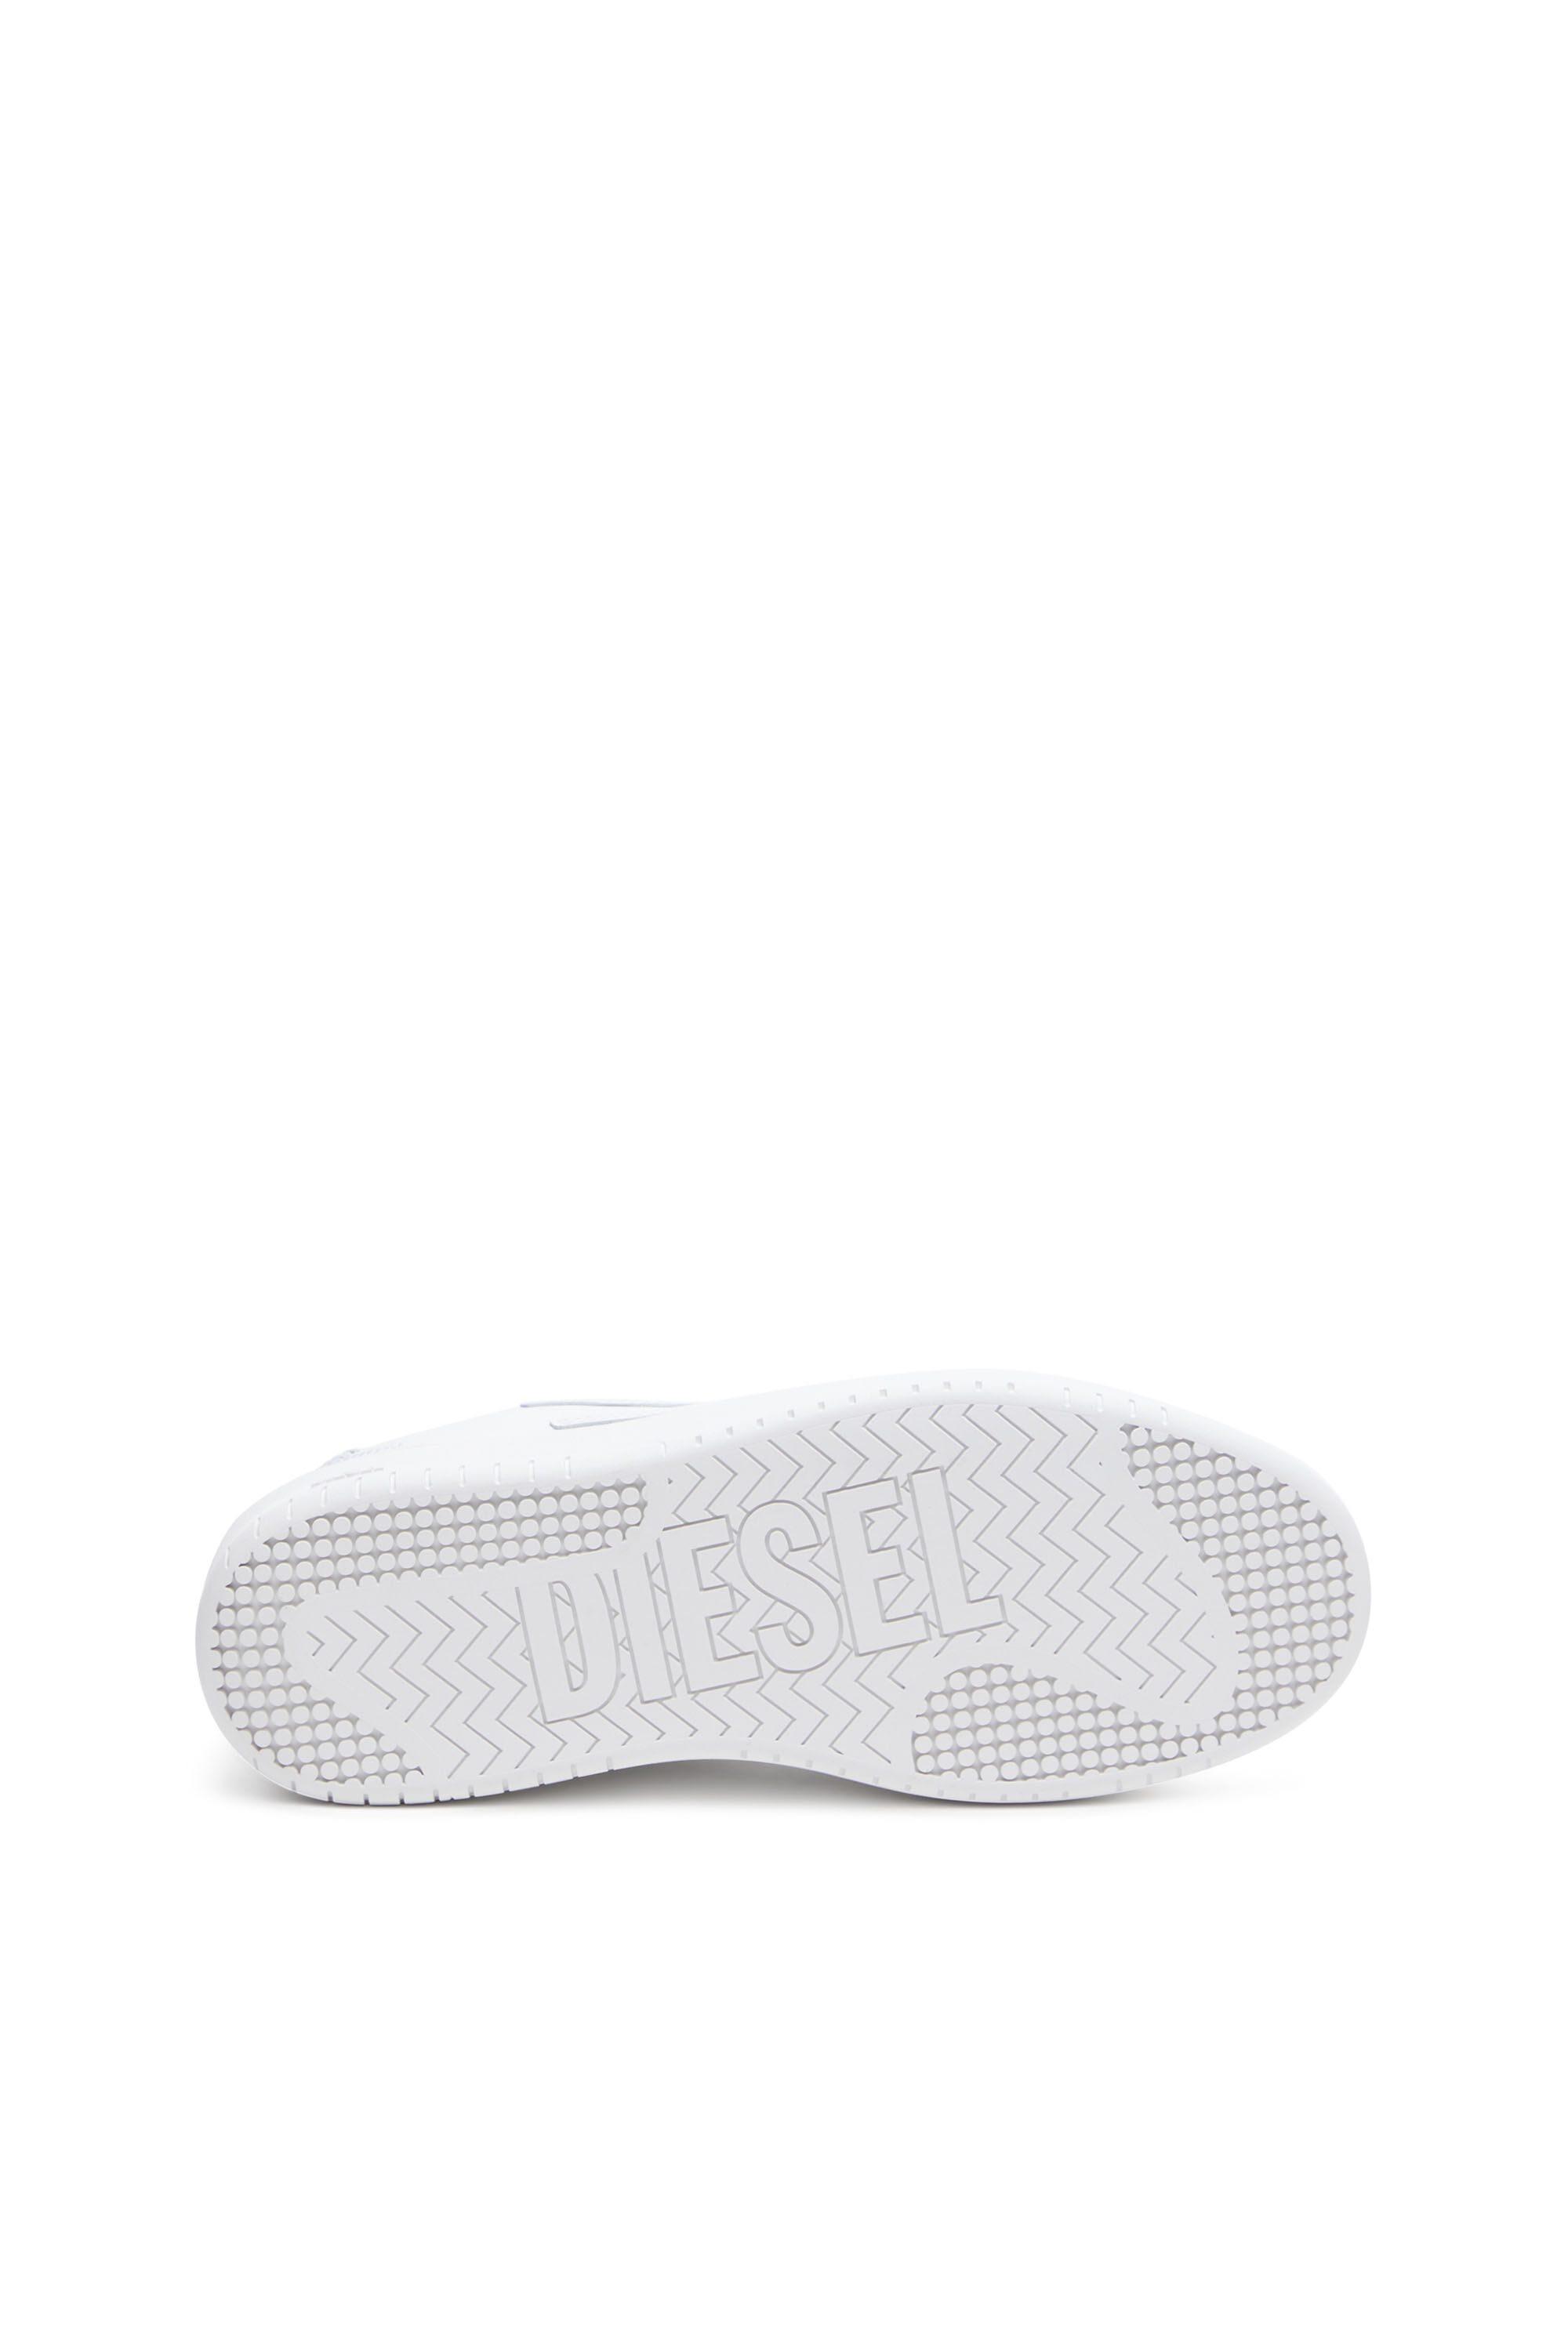 Diesel - S-ATHENE BOLD X, Woman S-Athene Bold-Flatform sneakers in leather in White - Image 5